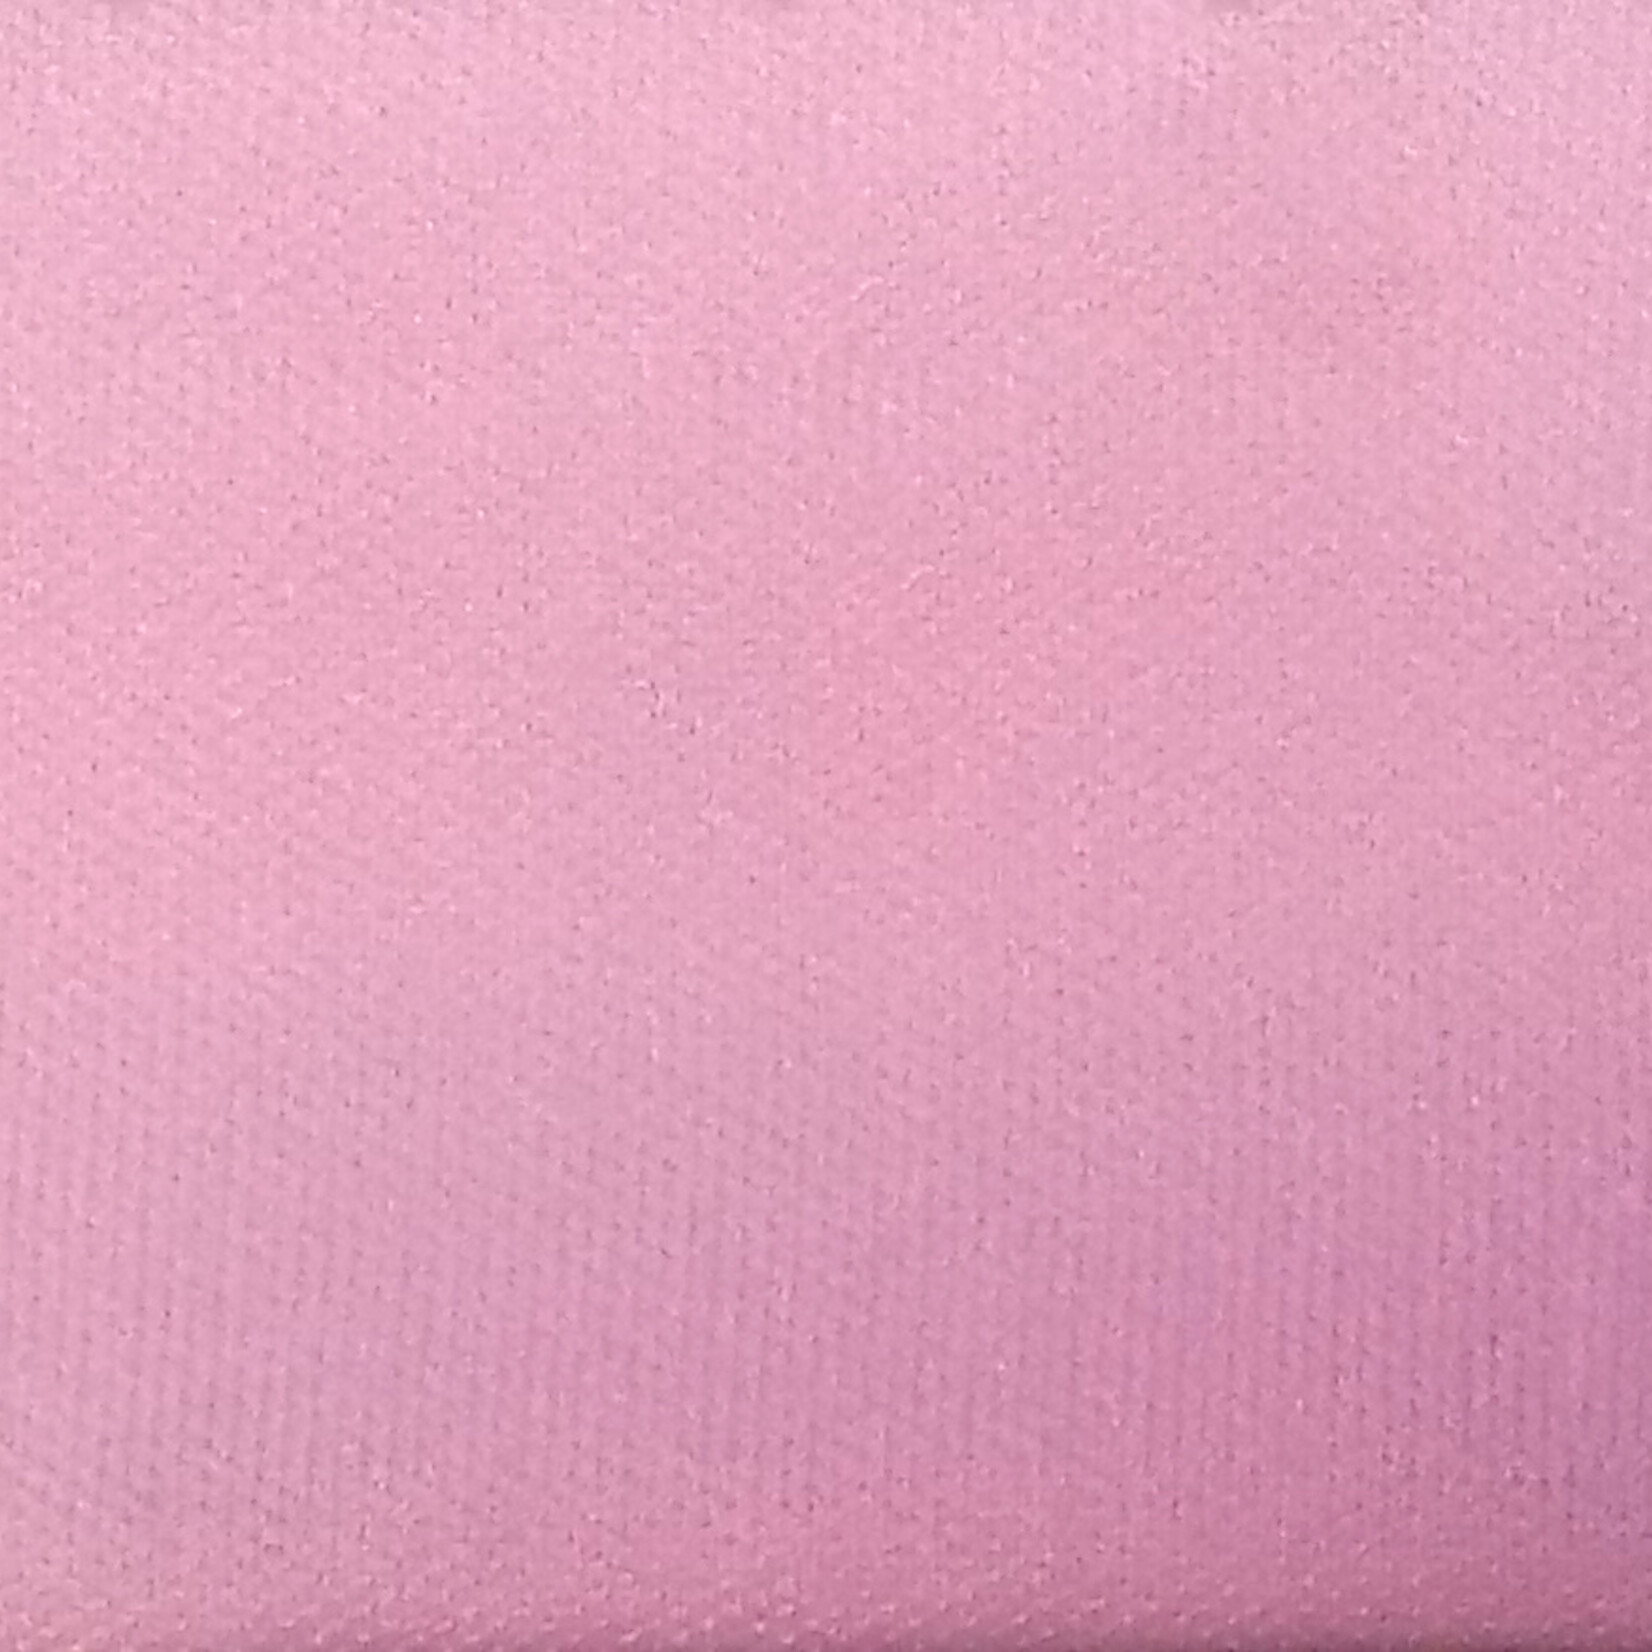 Plain Quiana 58-60 Inches - Baby Pink